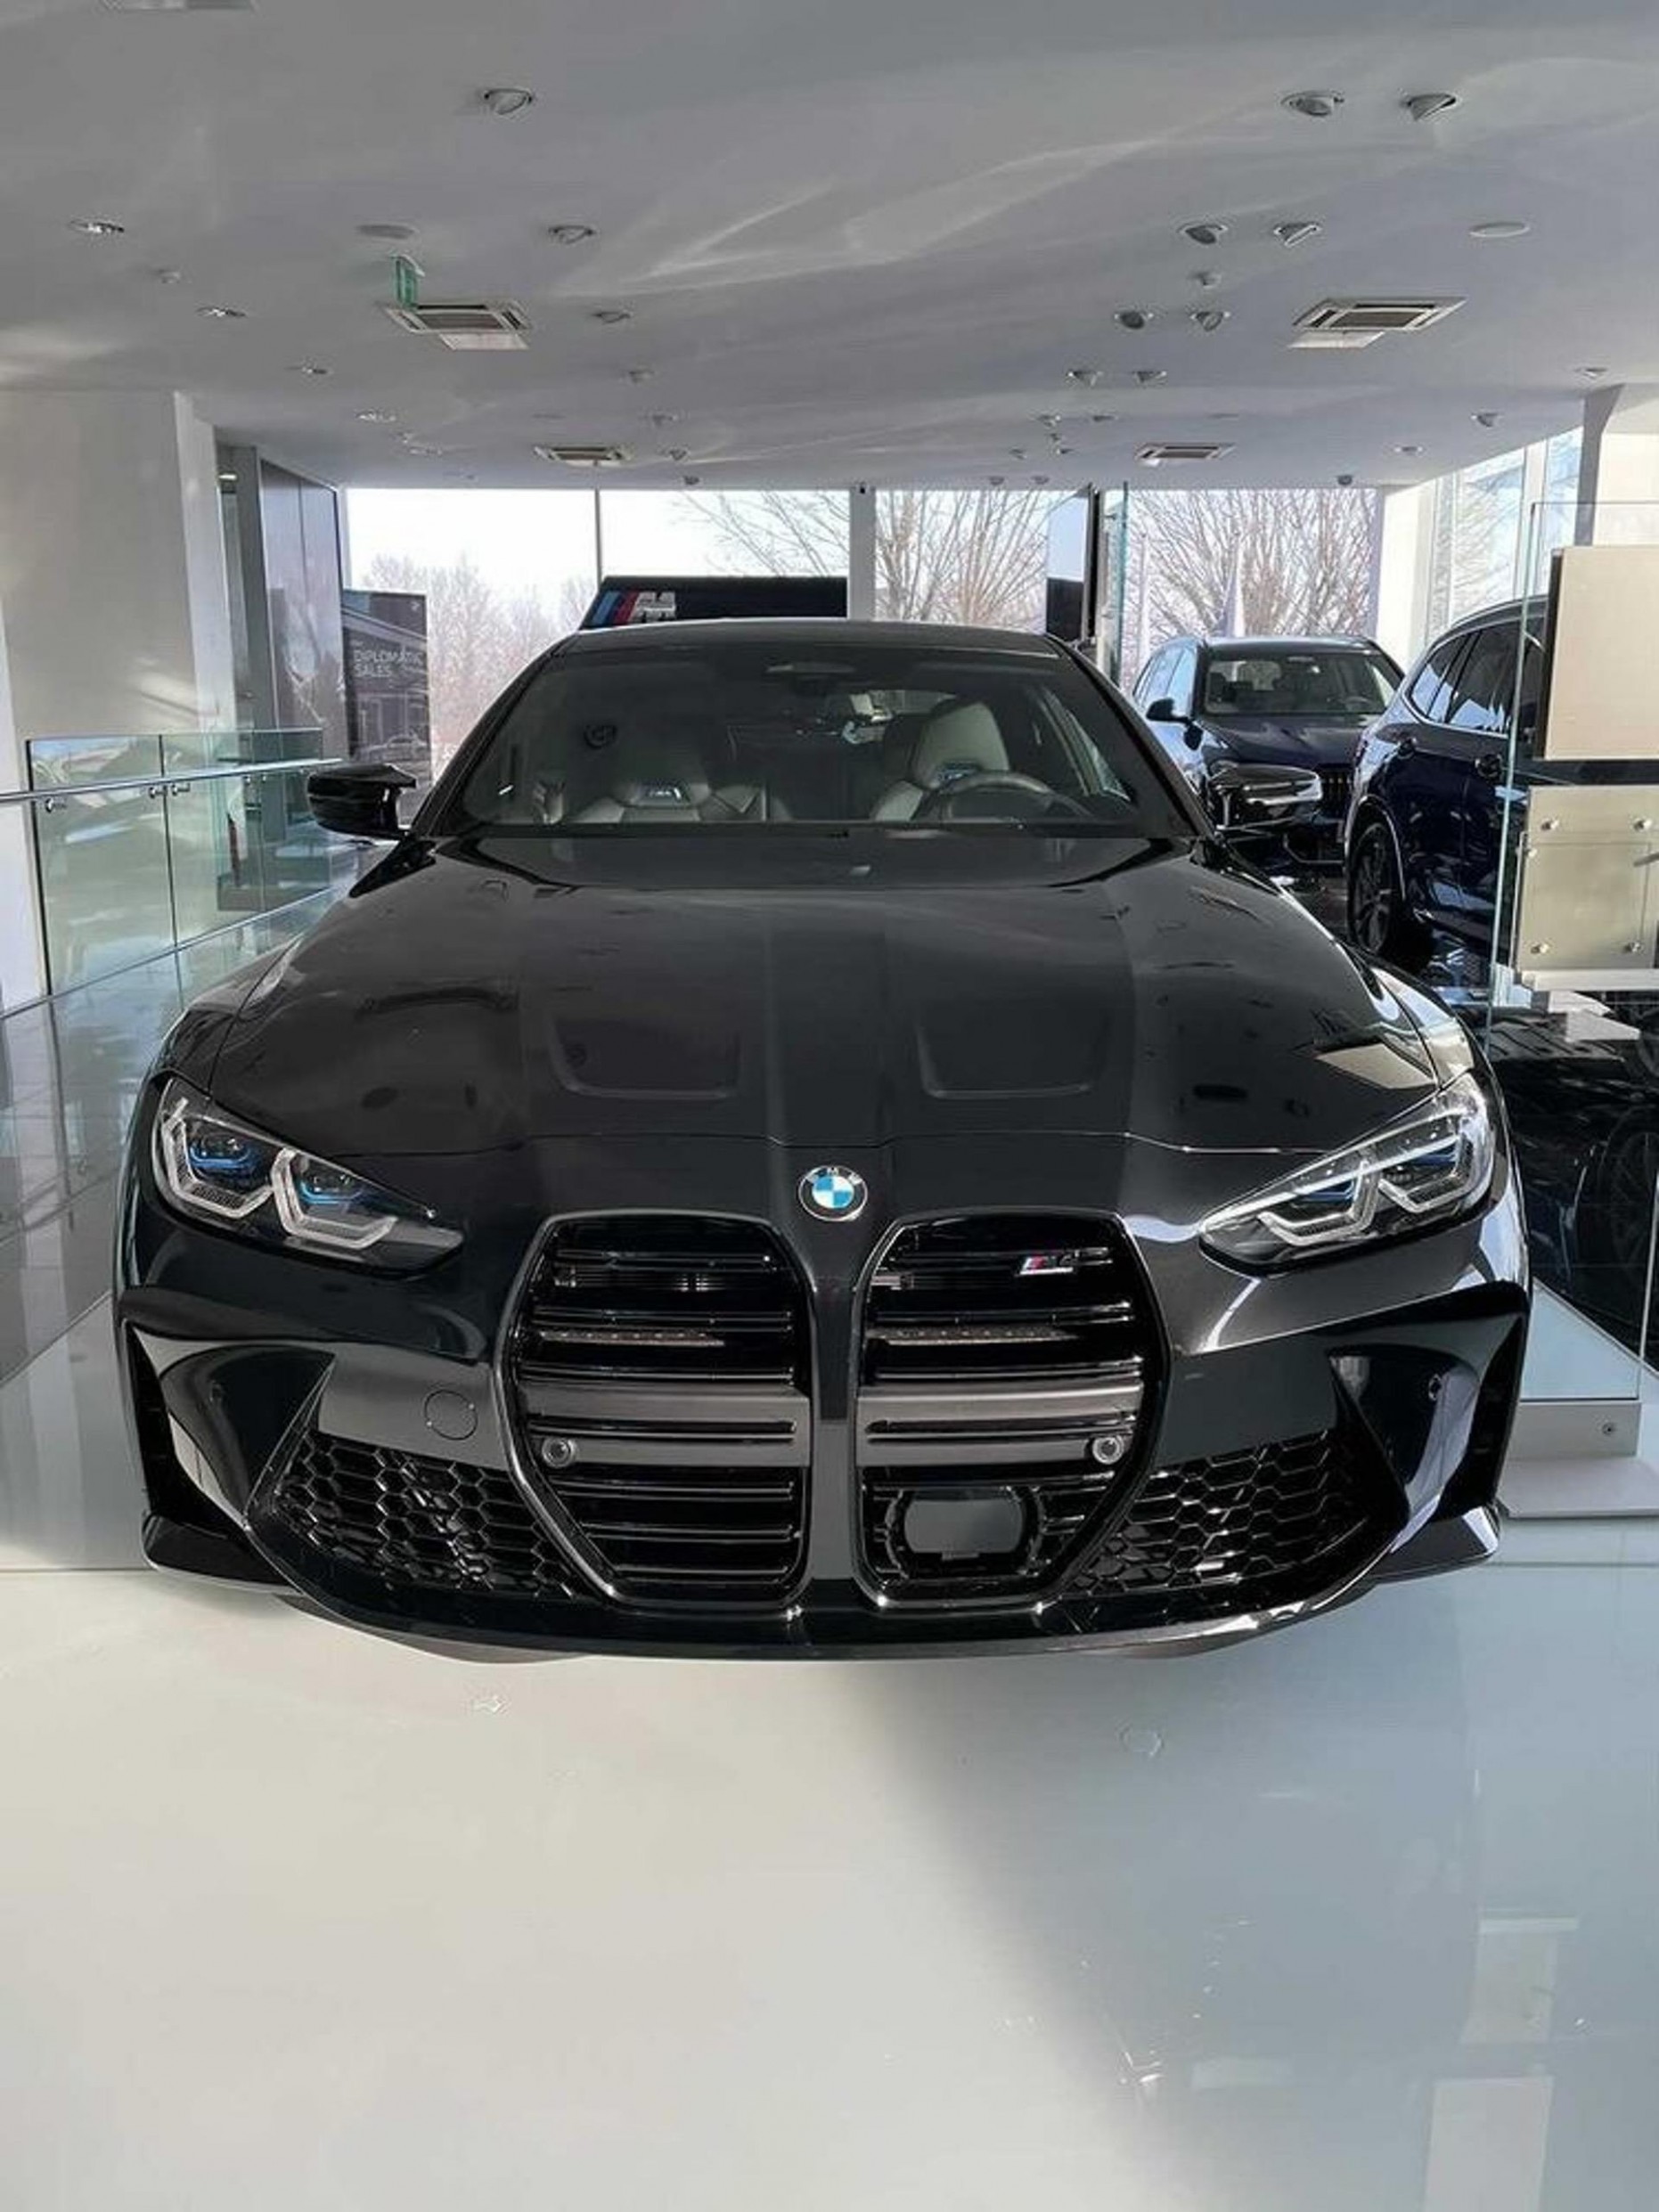 New photos of the 5 BMW M5 in Sapphire Black Metallic - BMW For 2021